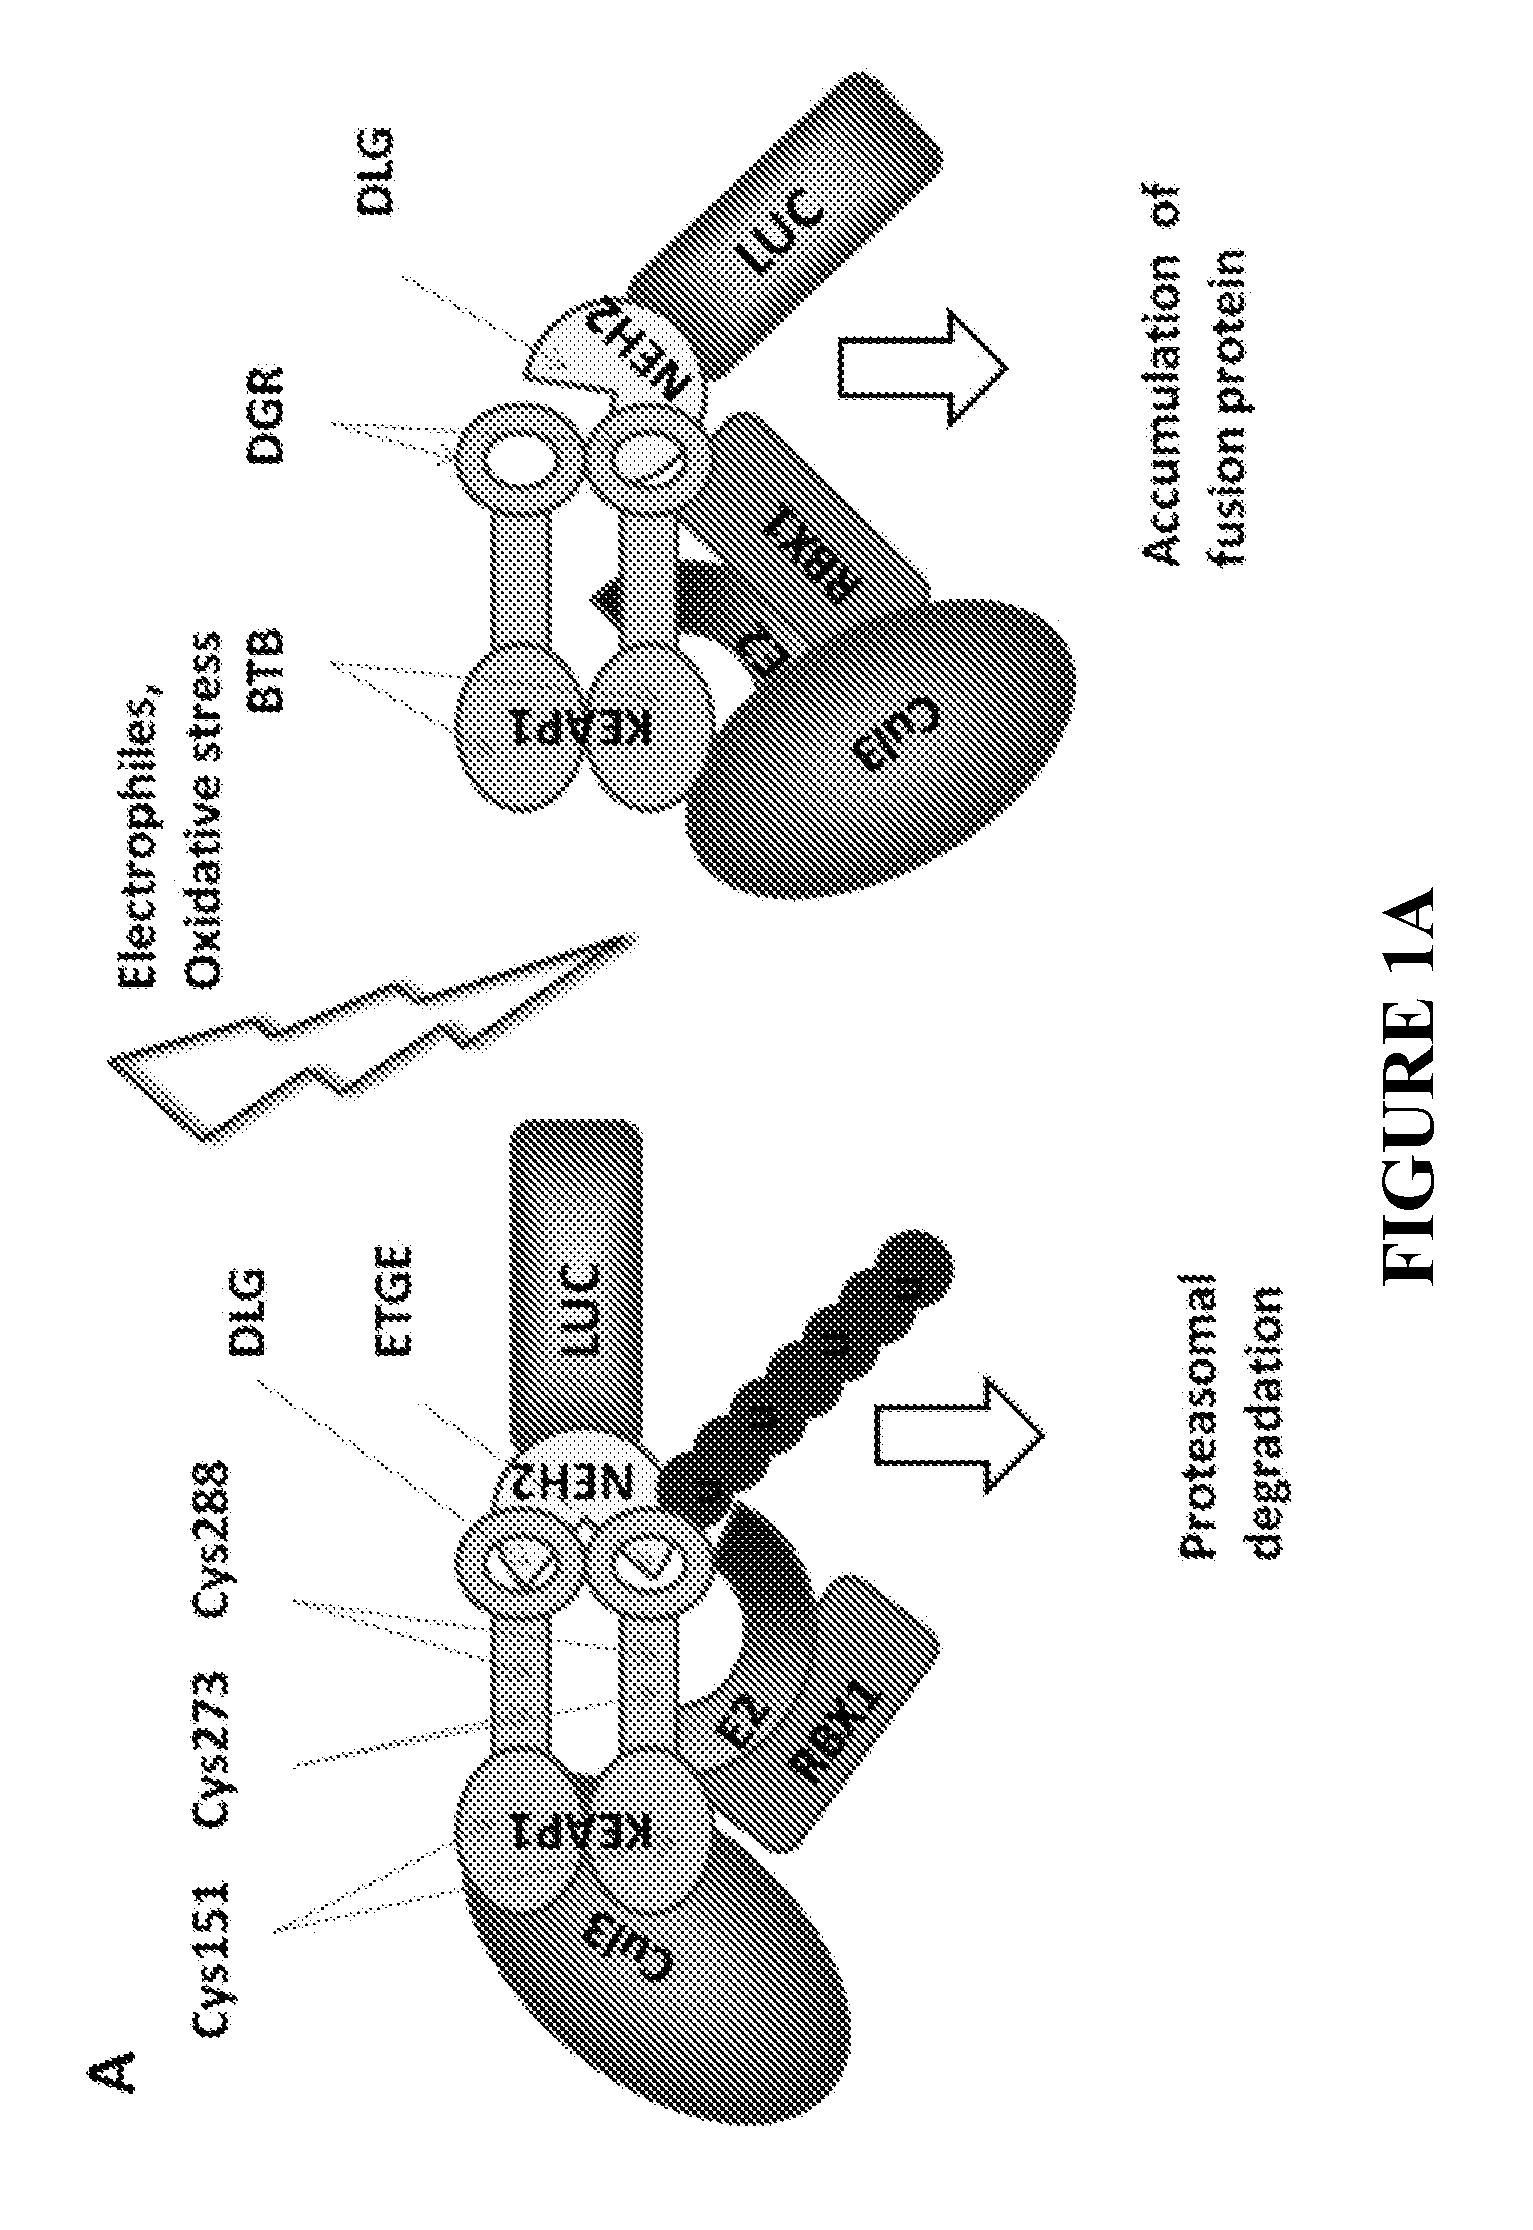 Reporter system for high throughput screening of compounds and uses thereof